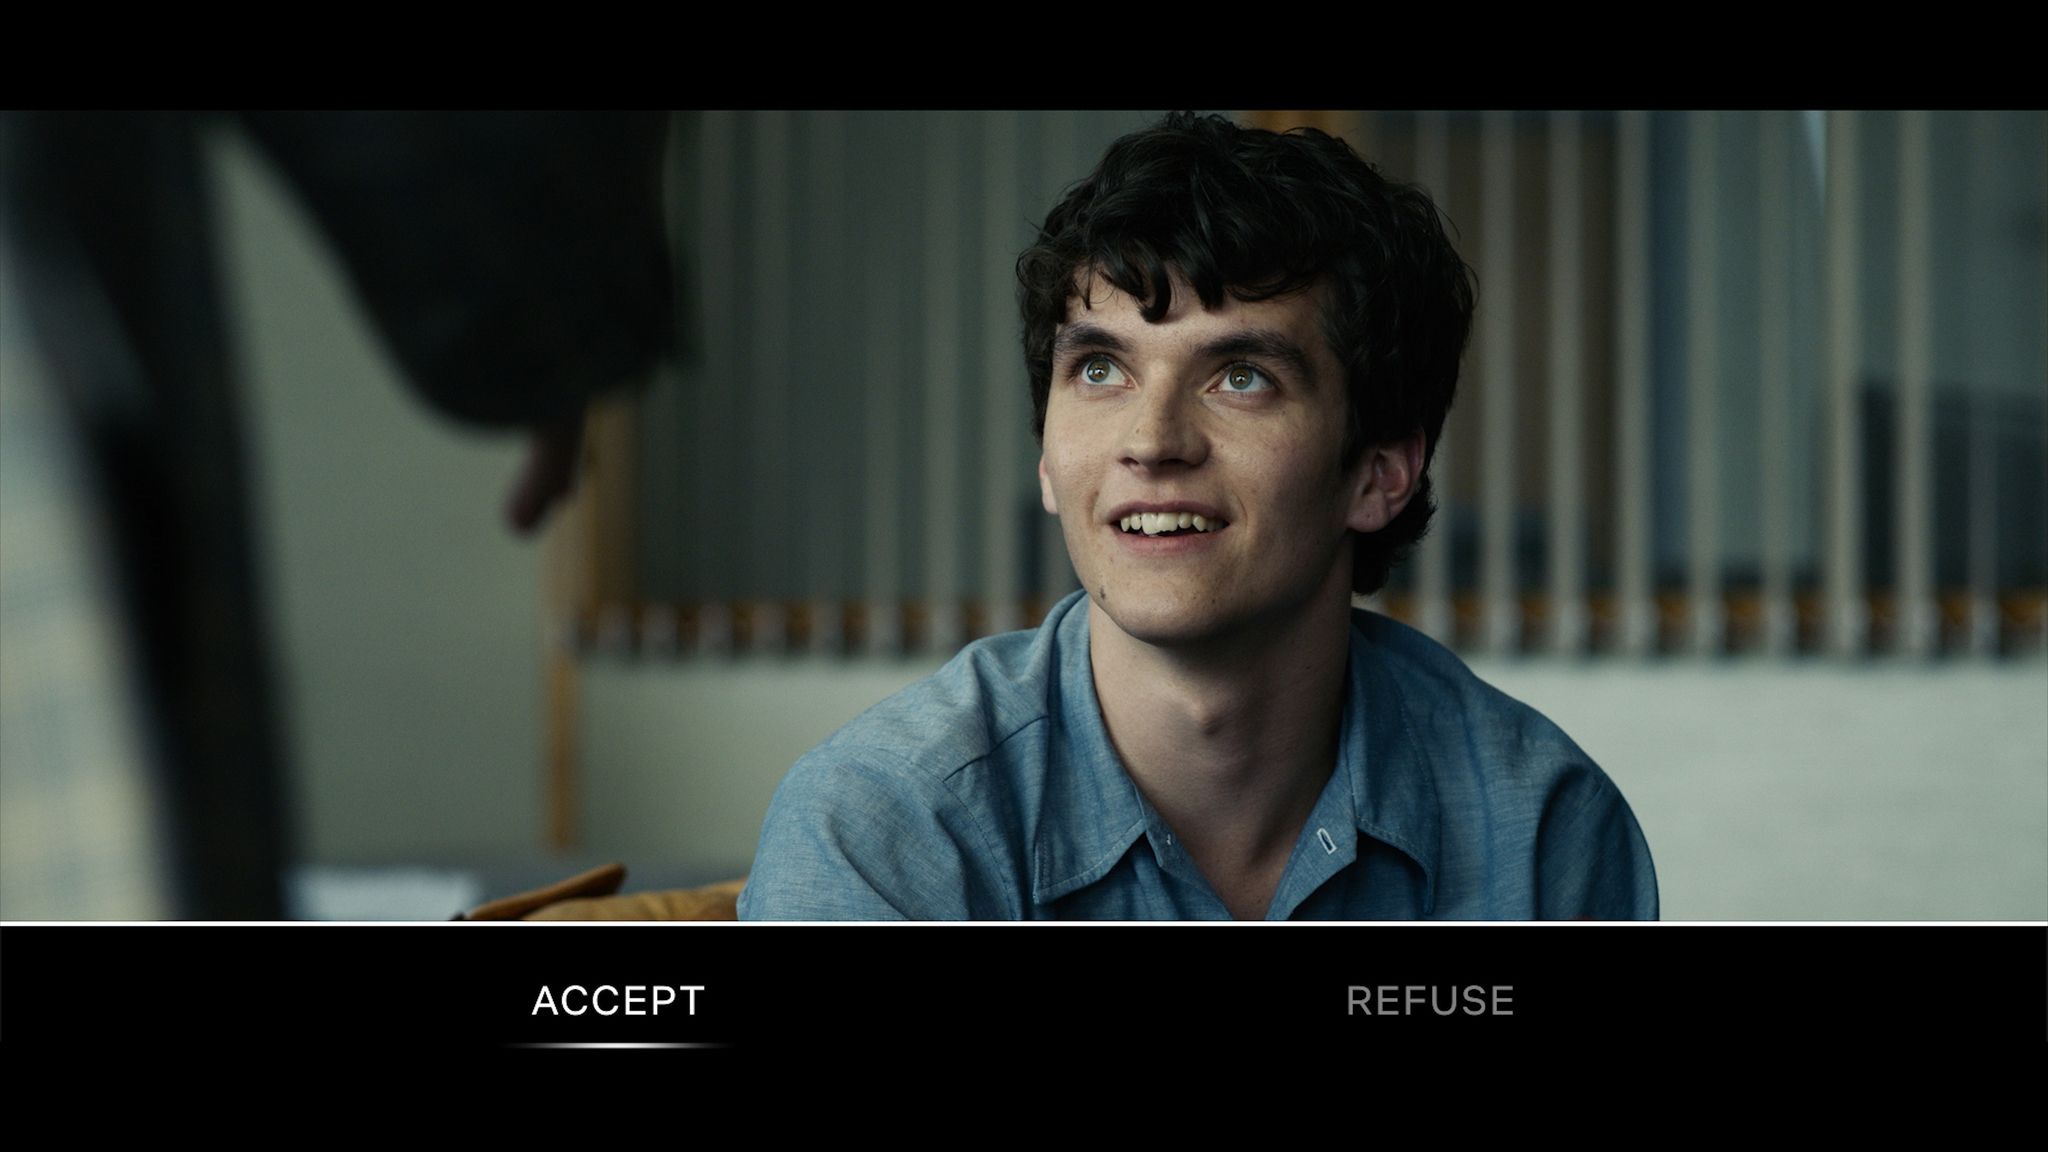 Netflix's Bandersnatch has viewers choose the direction the story goes in.